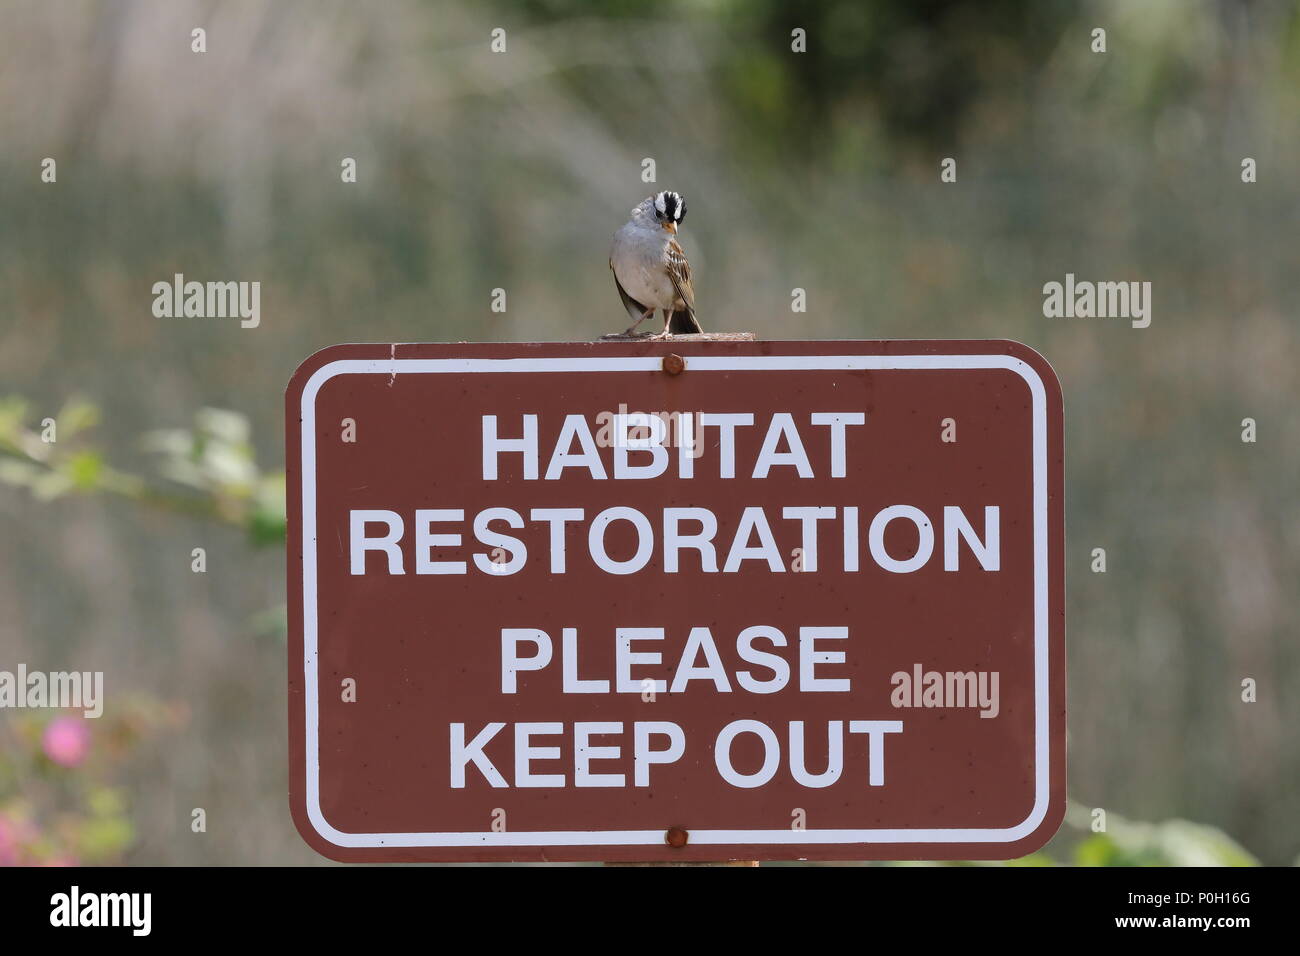 White-crowned Sparrow perched on a Habitat Restoration sign Stock Photo